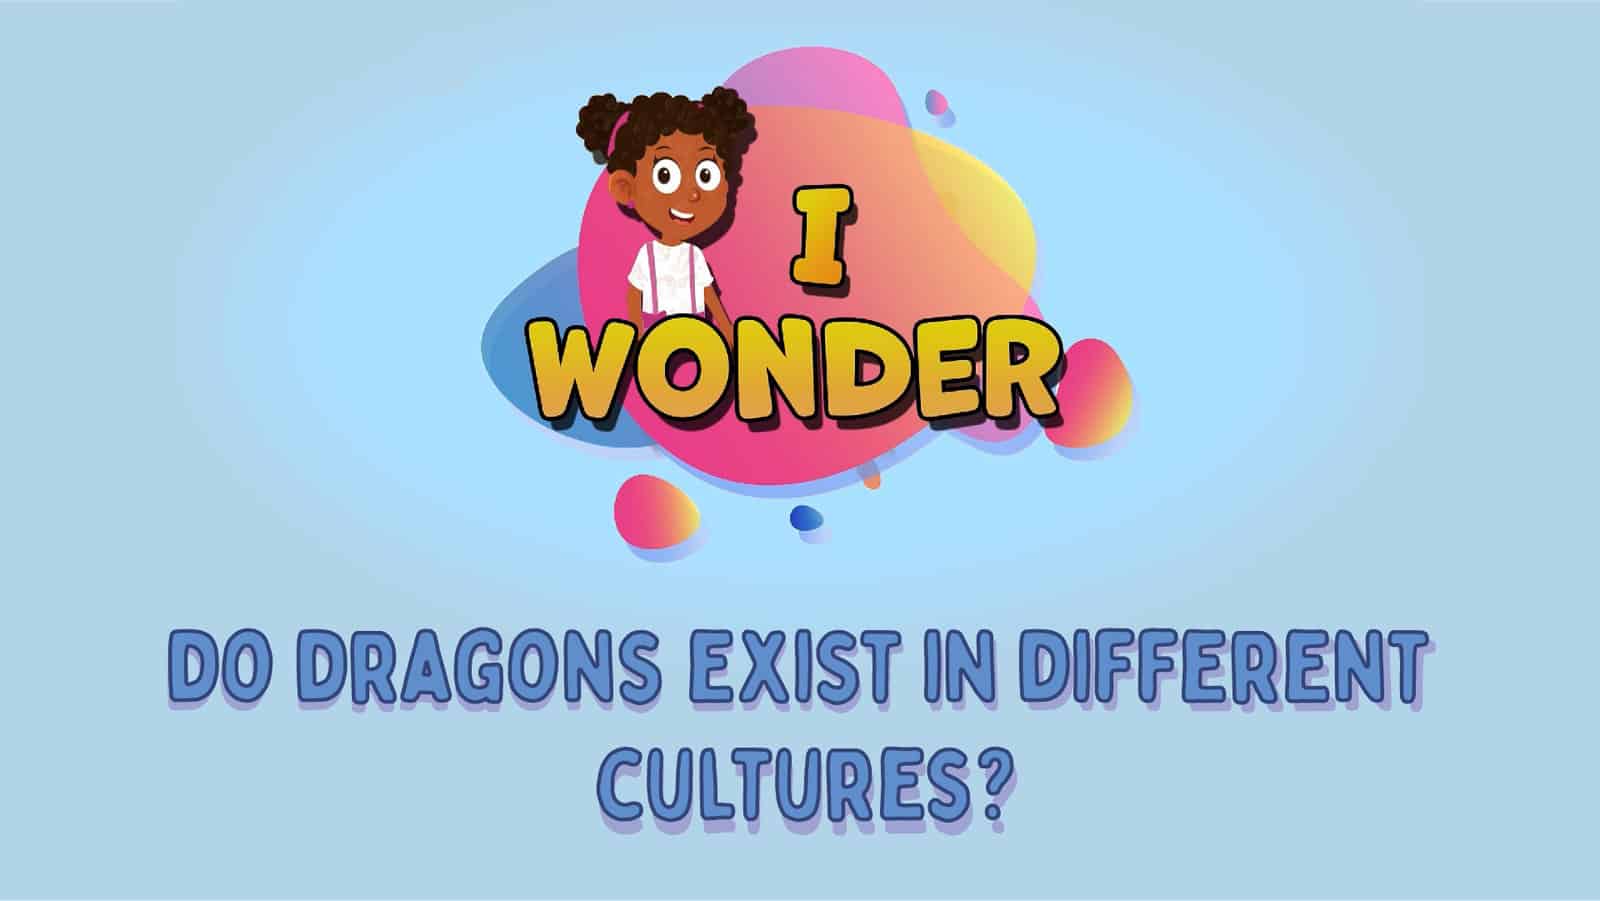 Do Dragons Exist In Different Cultures?